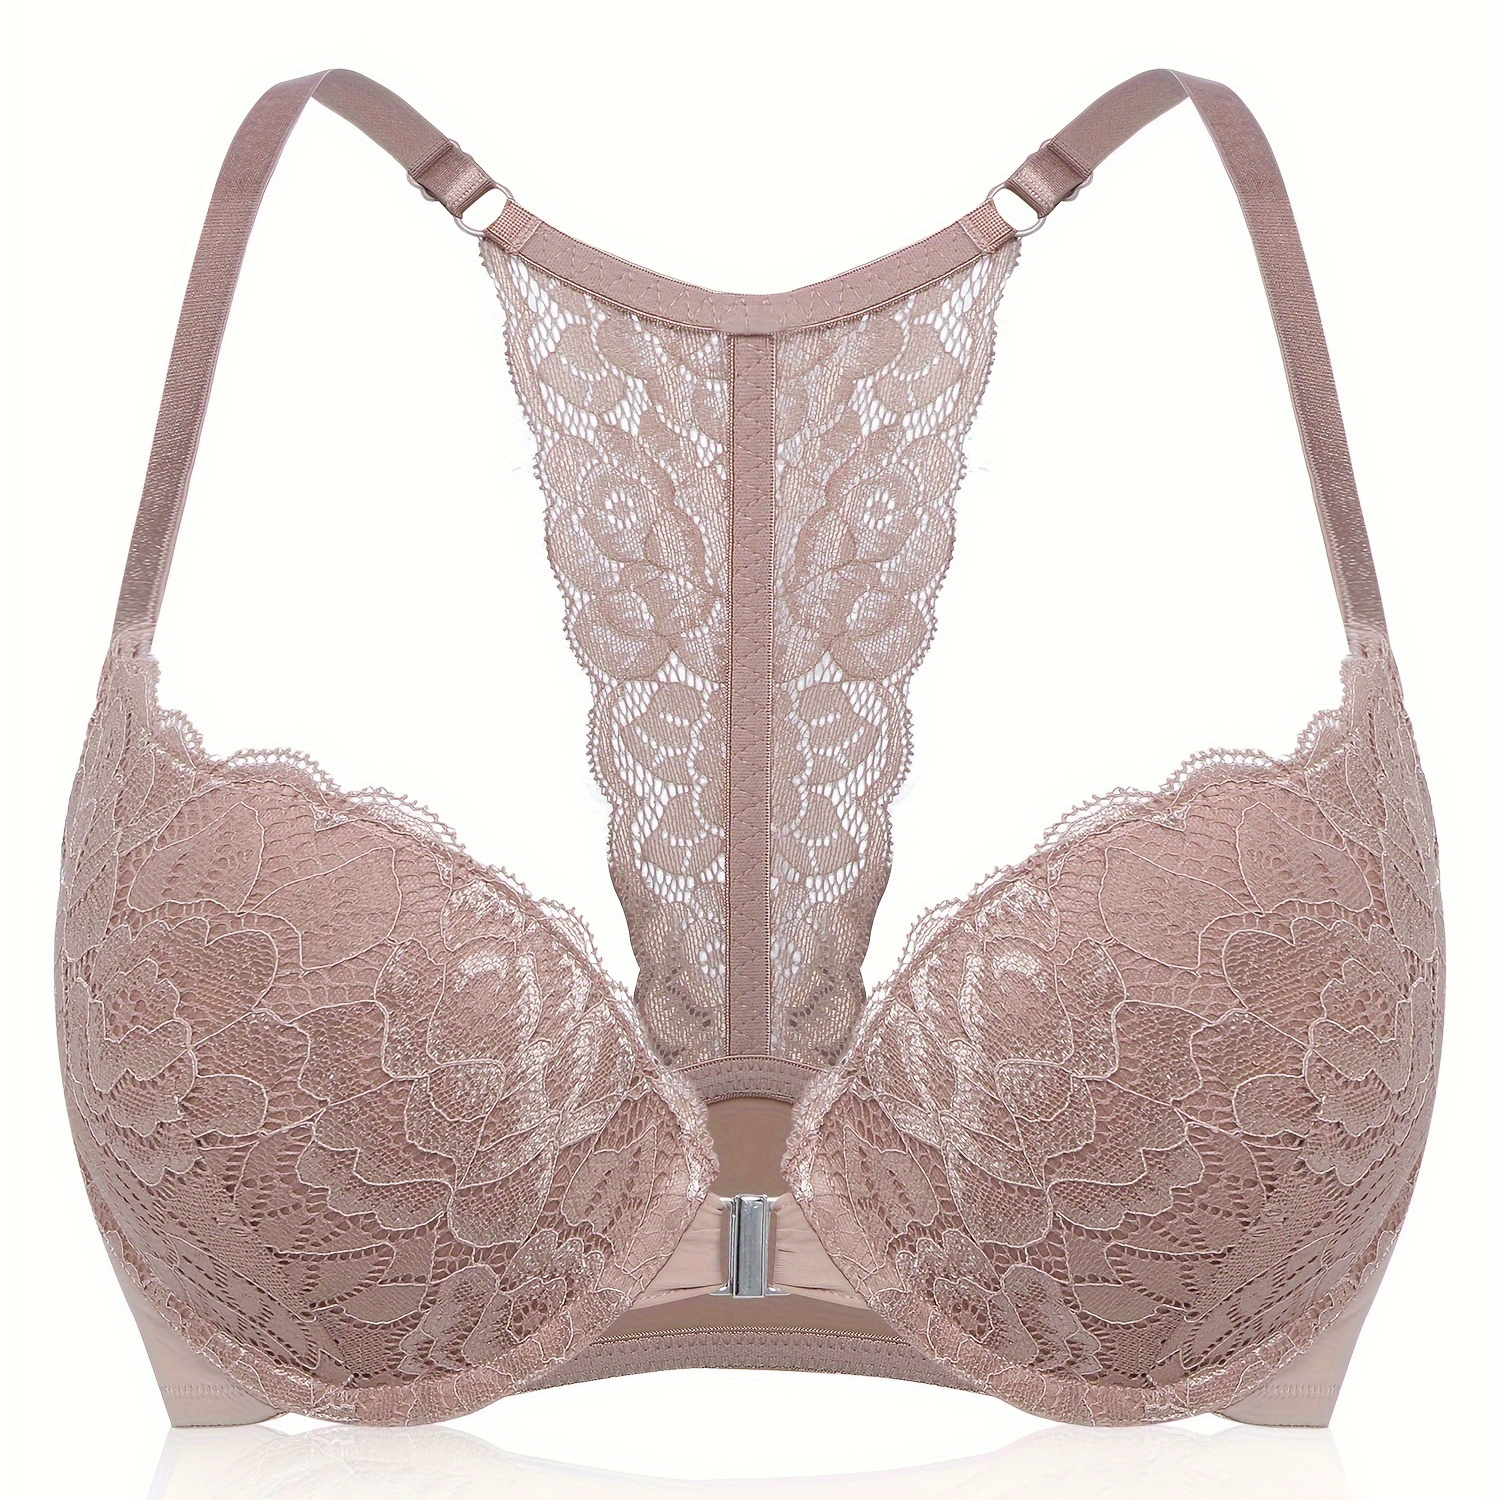 

Solid Seamless Floral Lace Underwire Bra, Sexy Comfy Push Up Bra, Women's Lingerie & Underwear